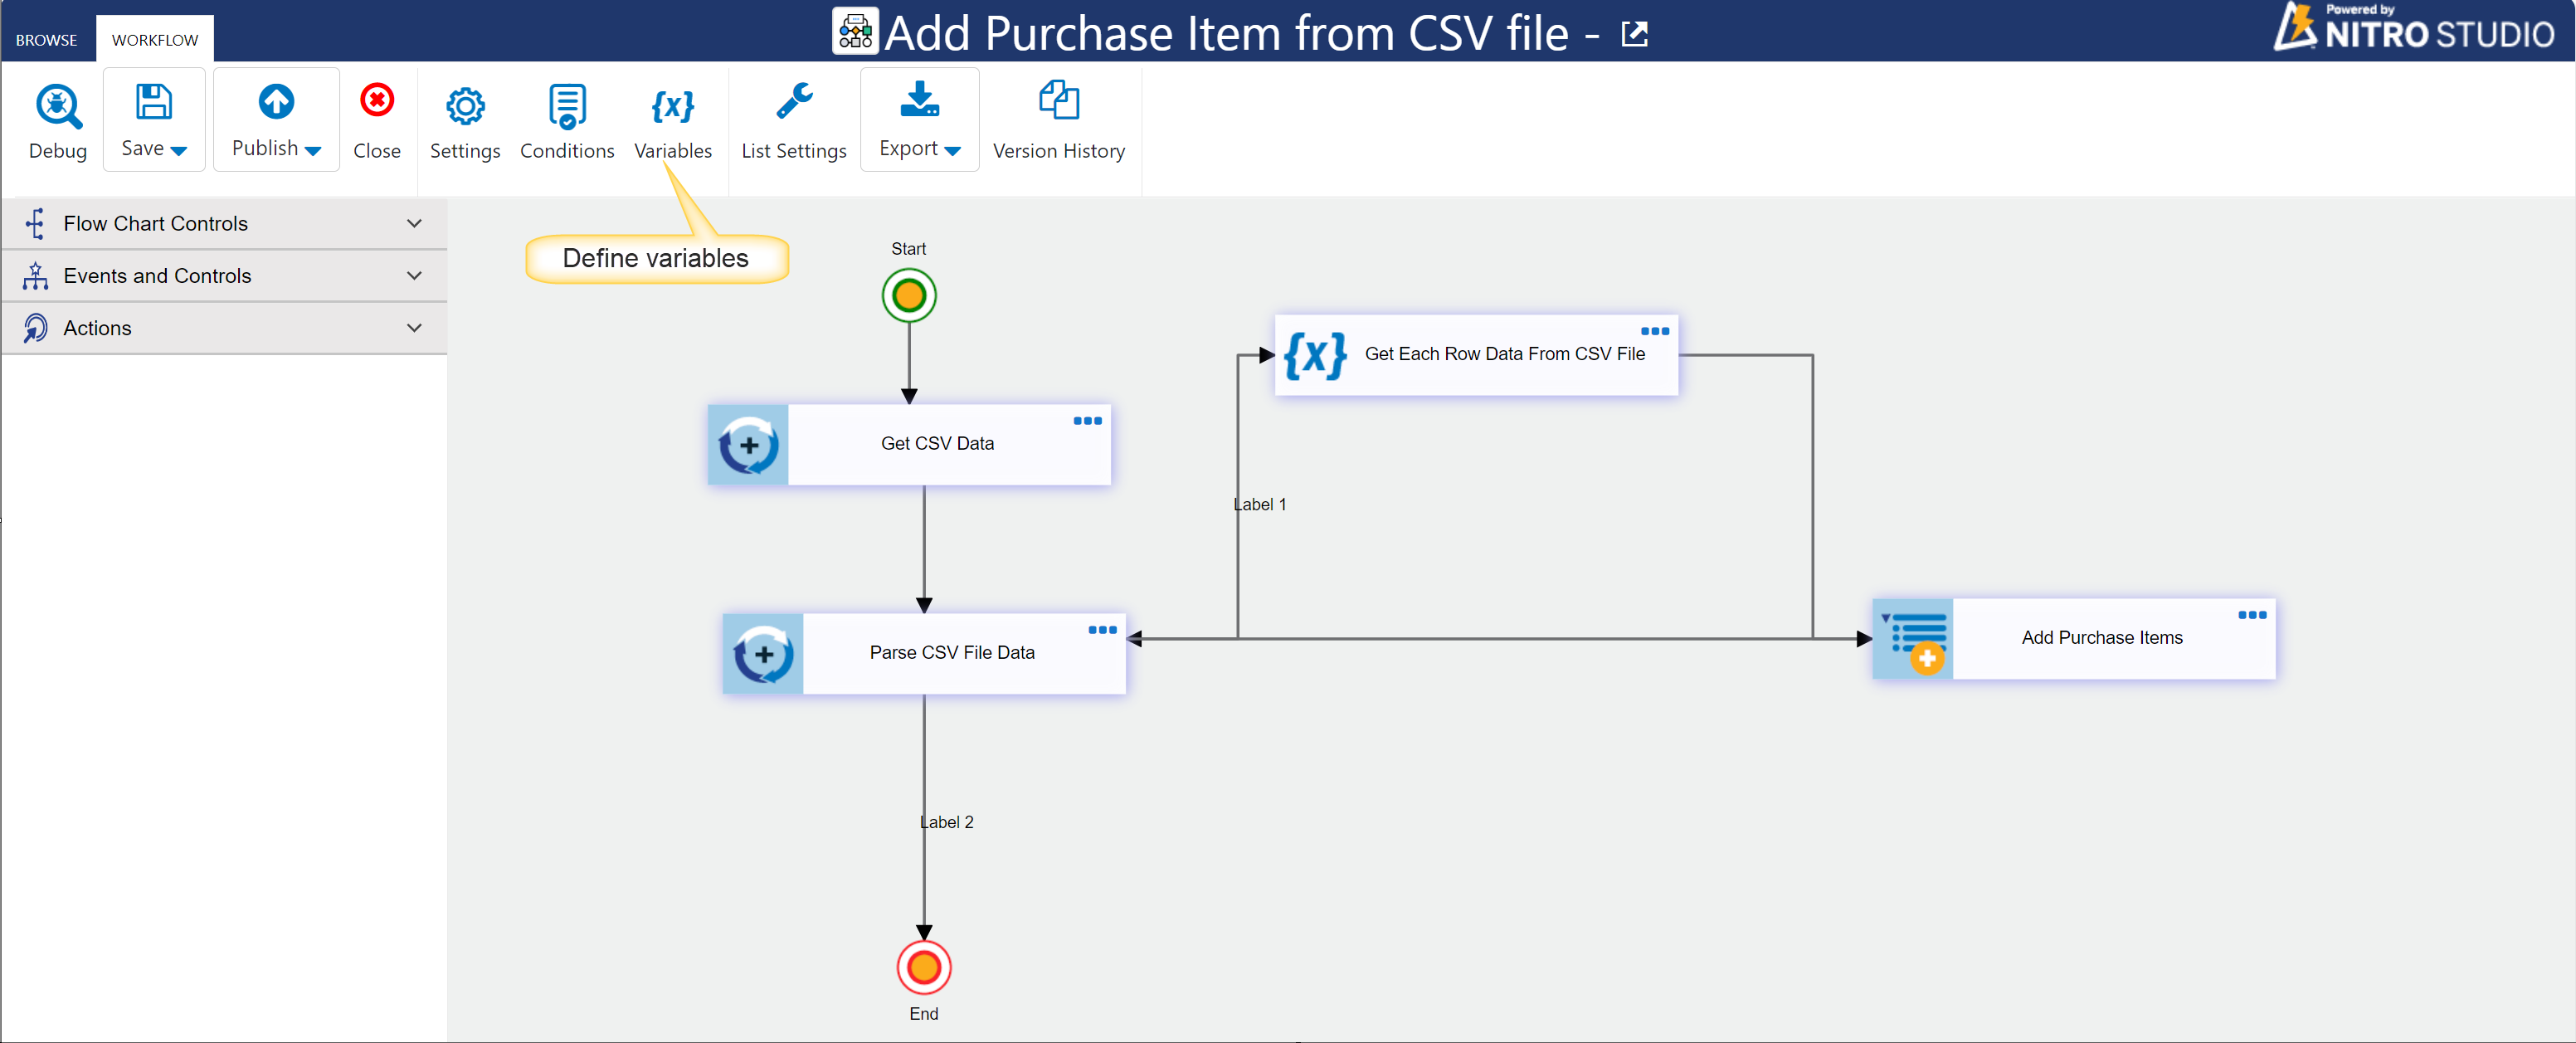 Add Purchase Items workflow